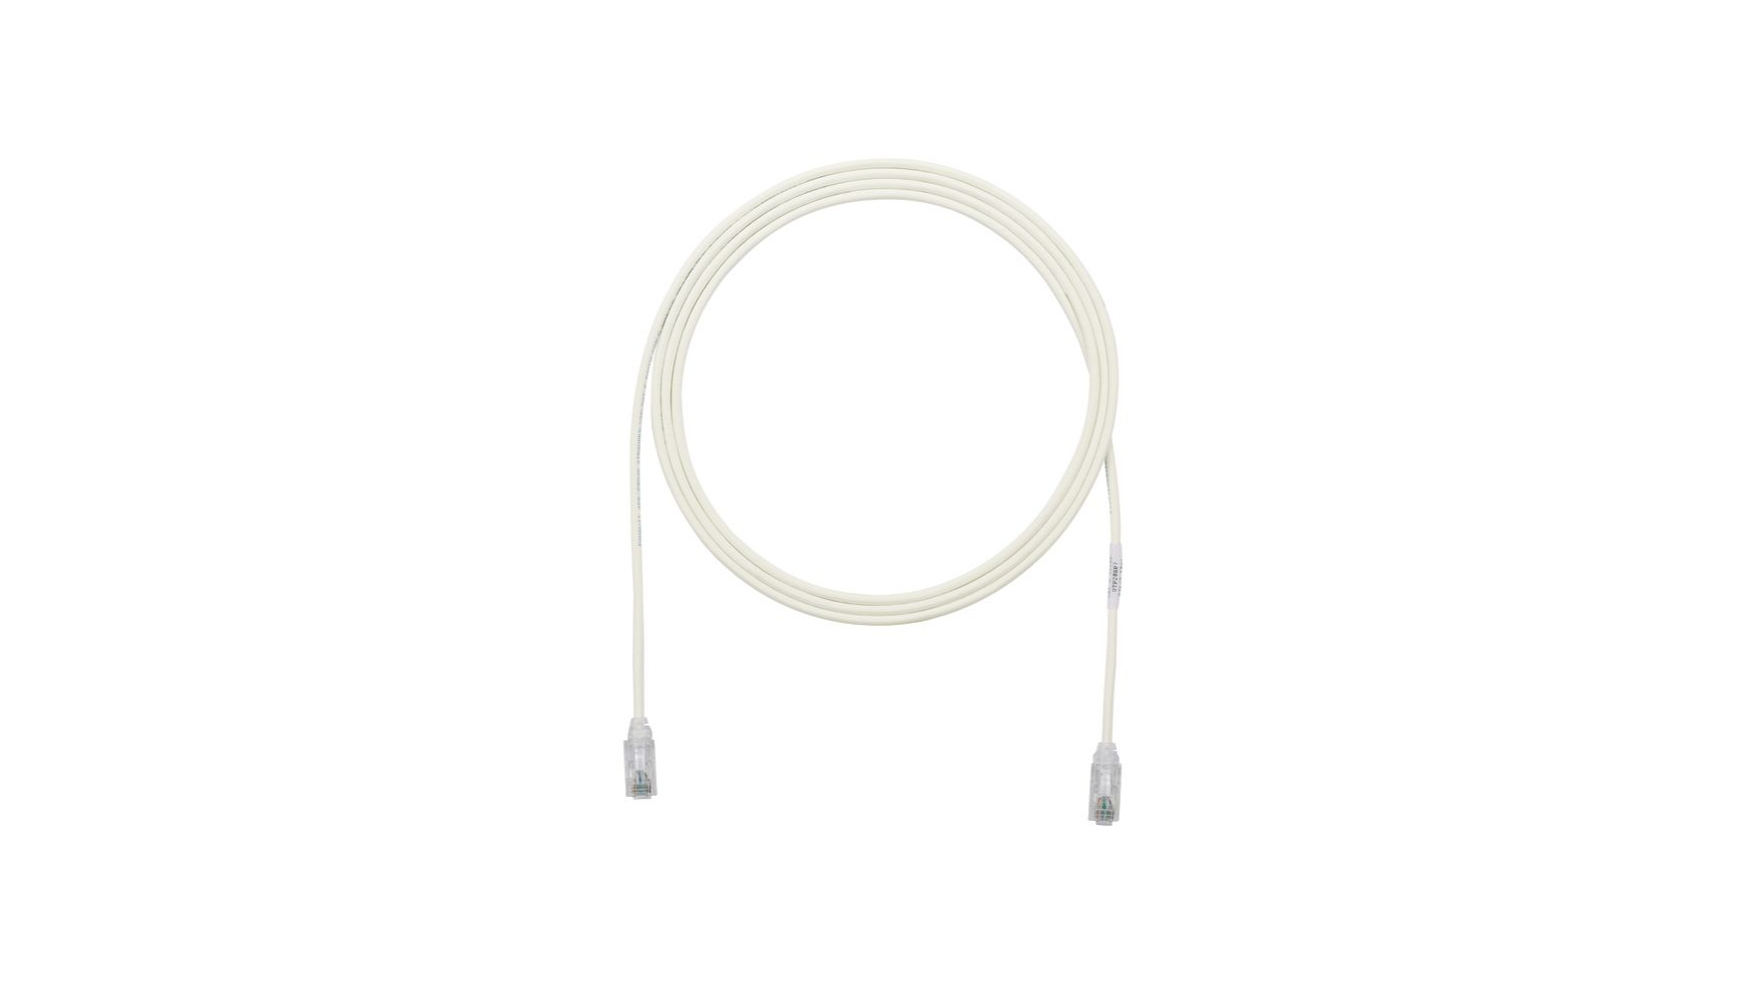 Panduit Copper Patch Cord, Cat 6, AWG 28, White UTP Cable, 1 m